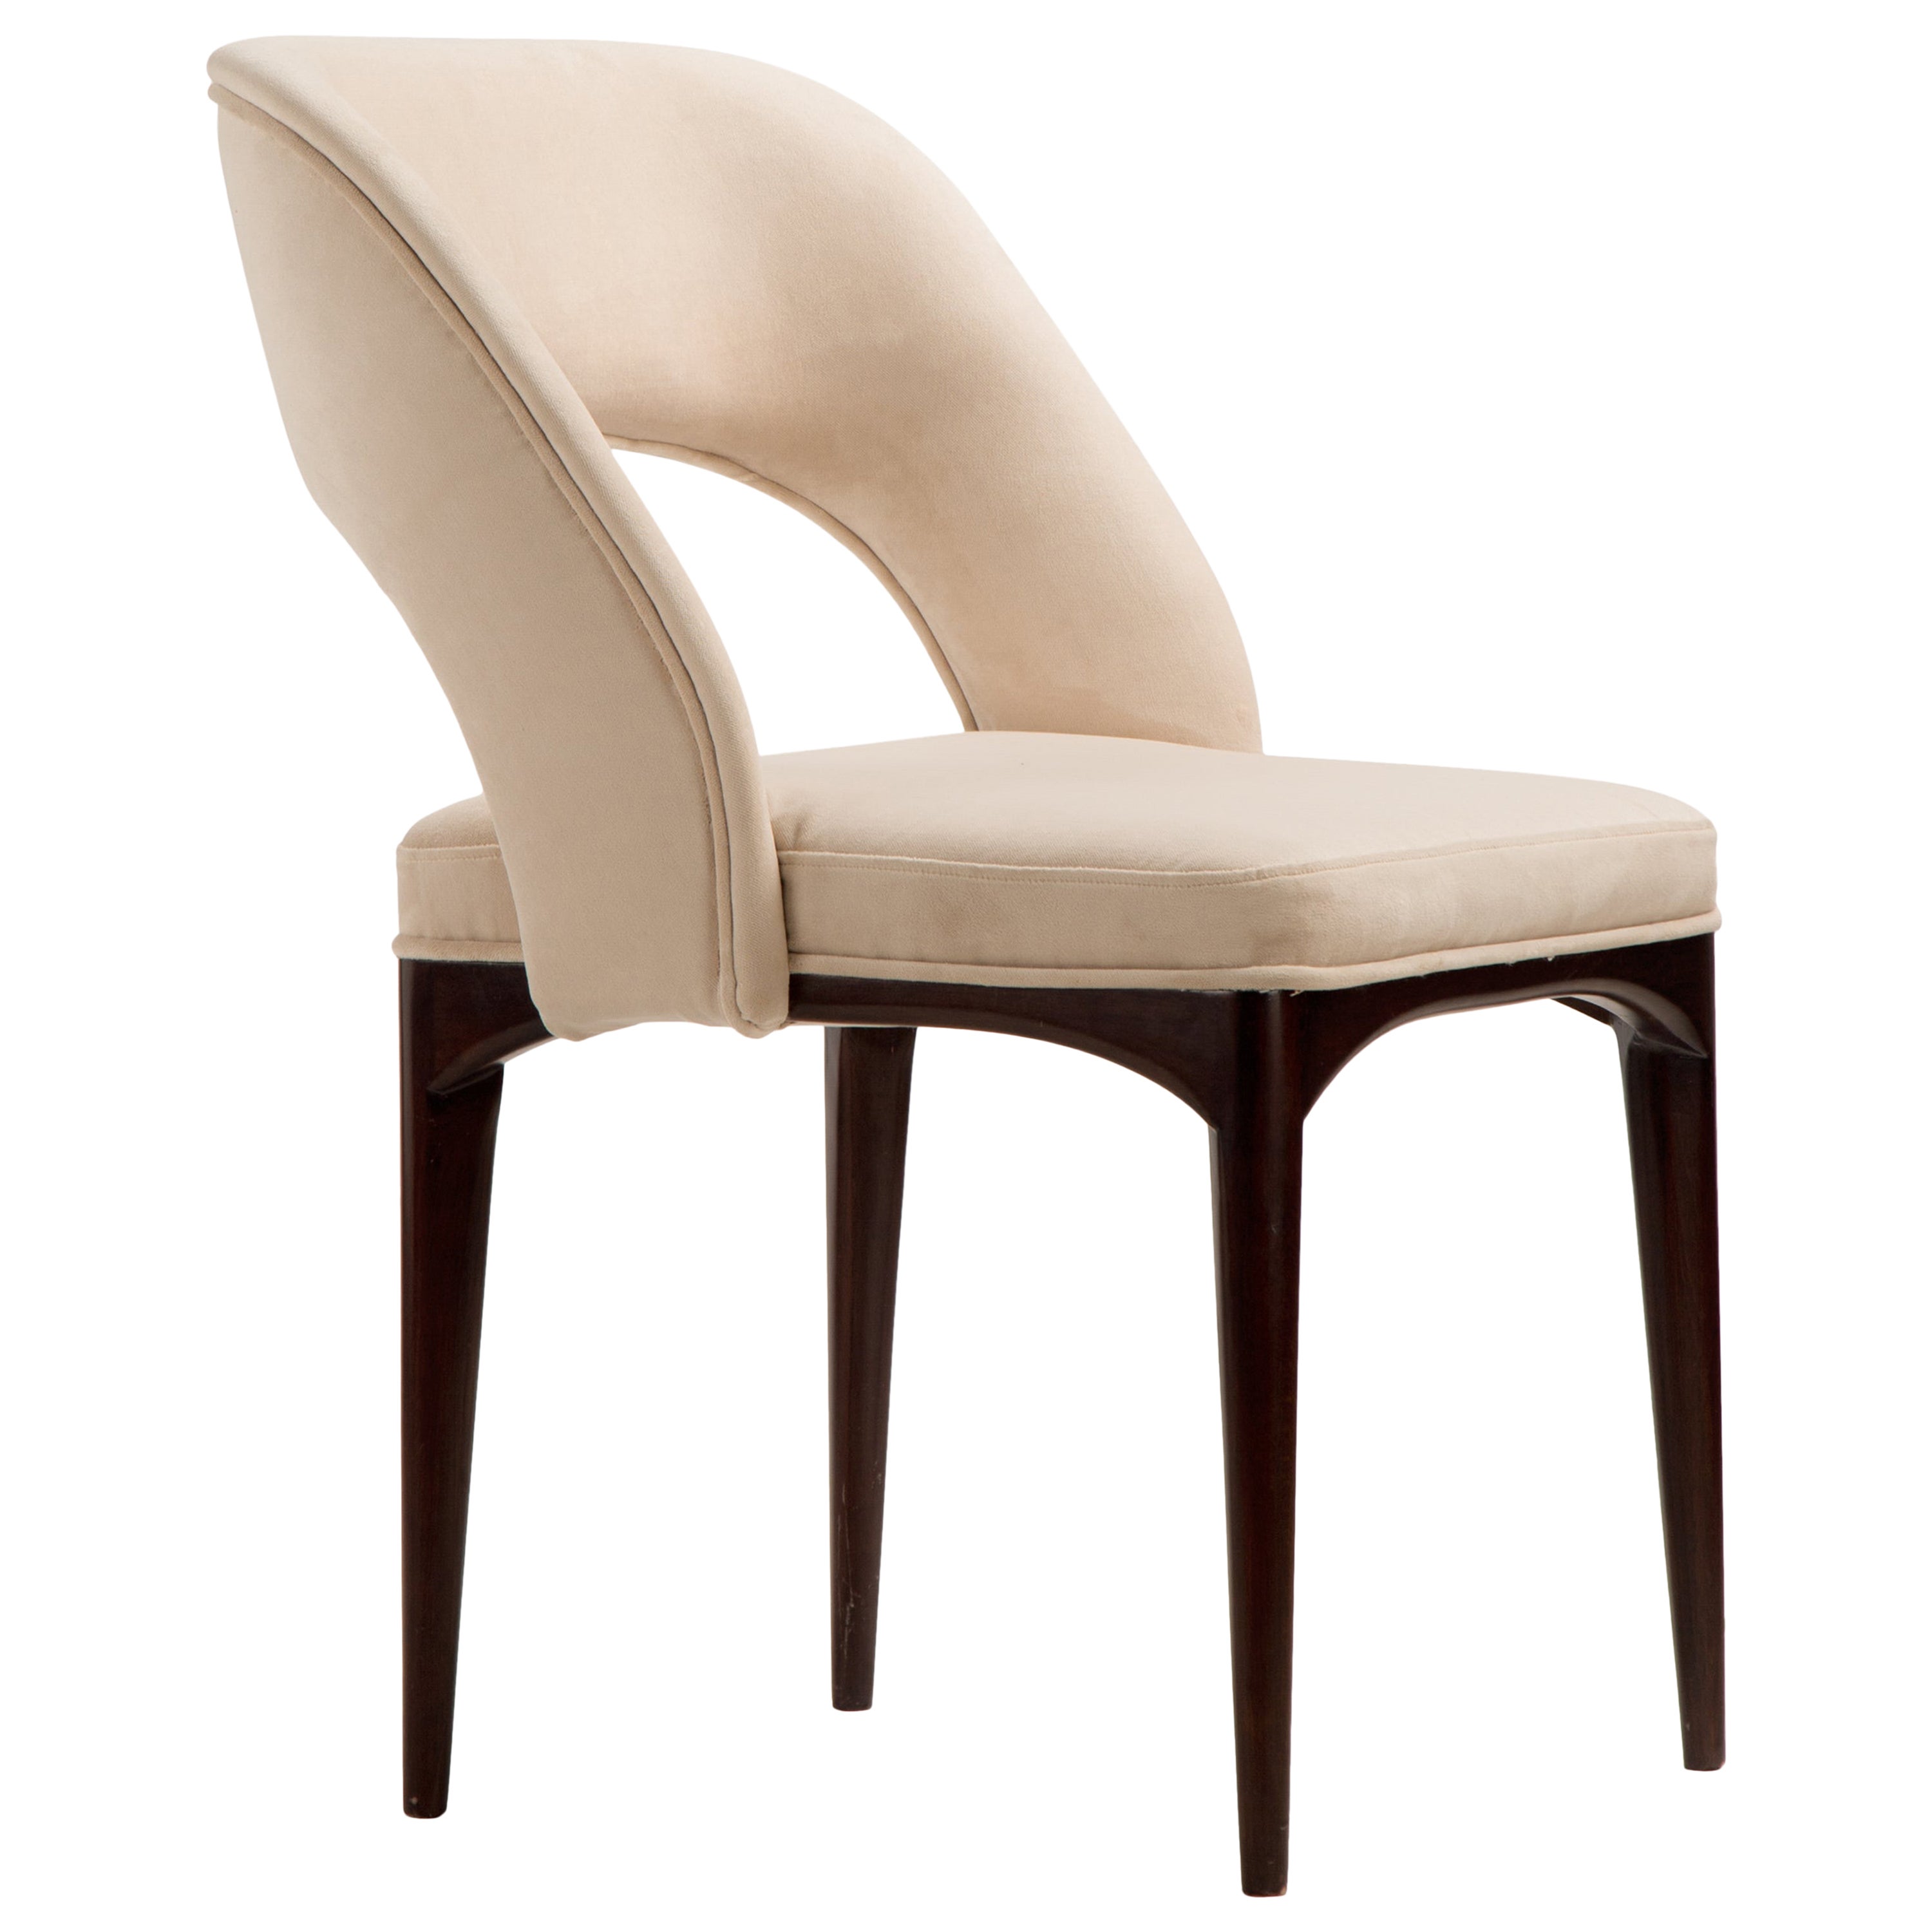 Cedar Wood Dining Chair with Faux Leather Upholstery